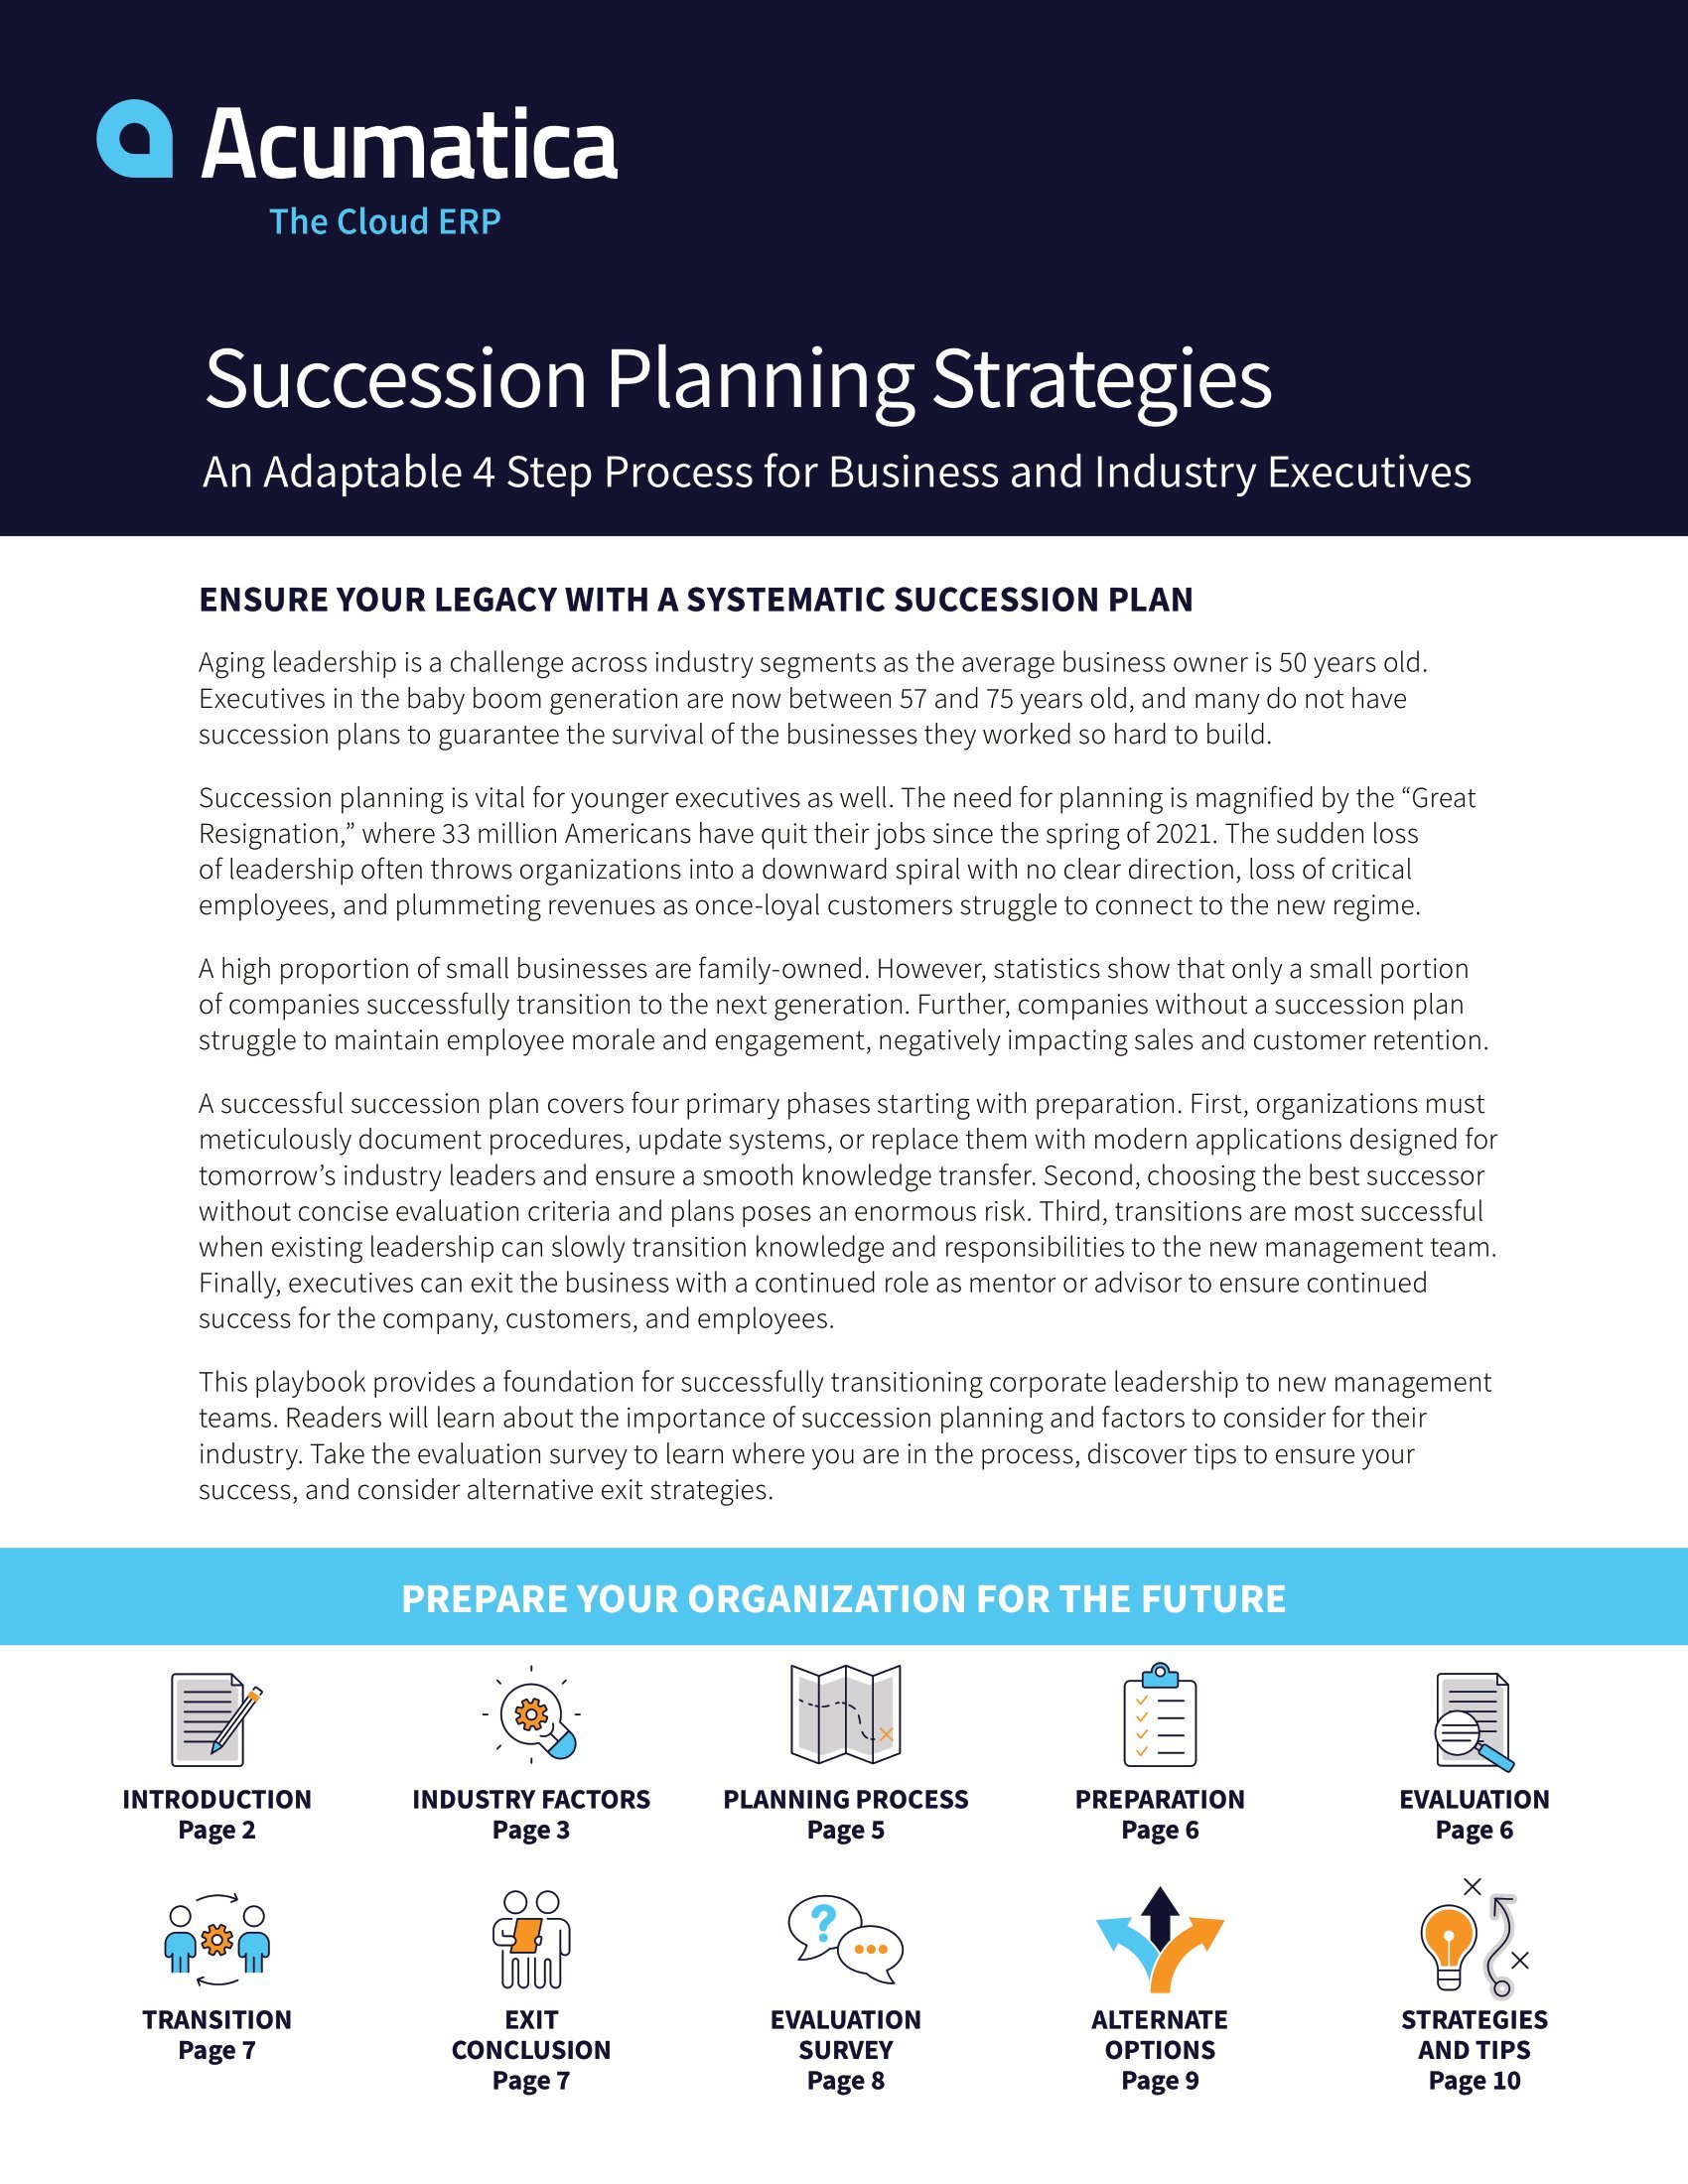 Why Succession Planning is So Important (and How to Do It Right)